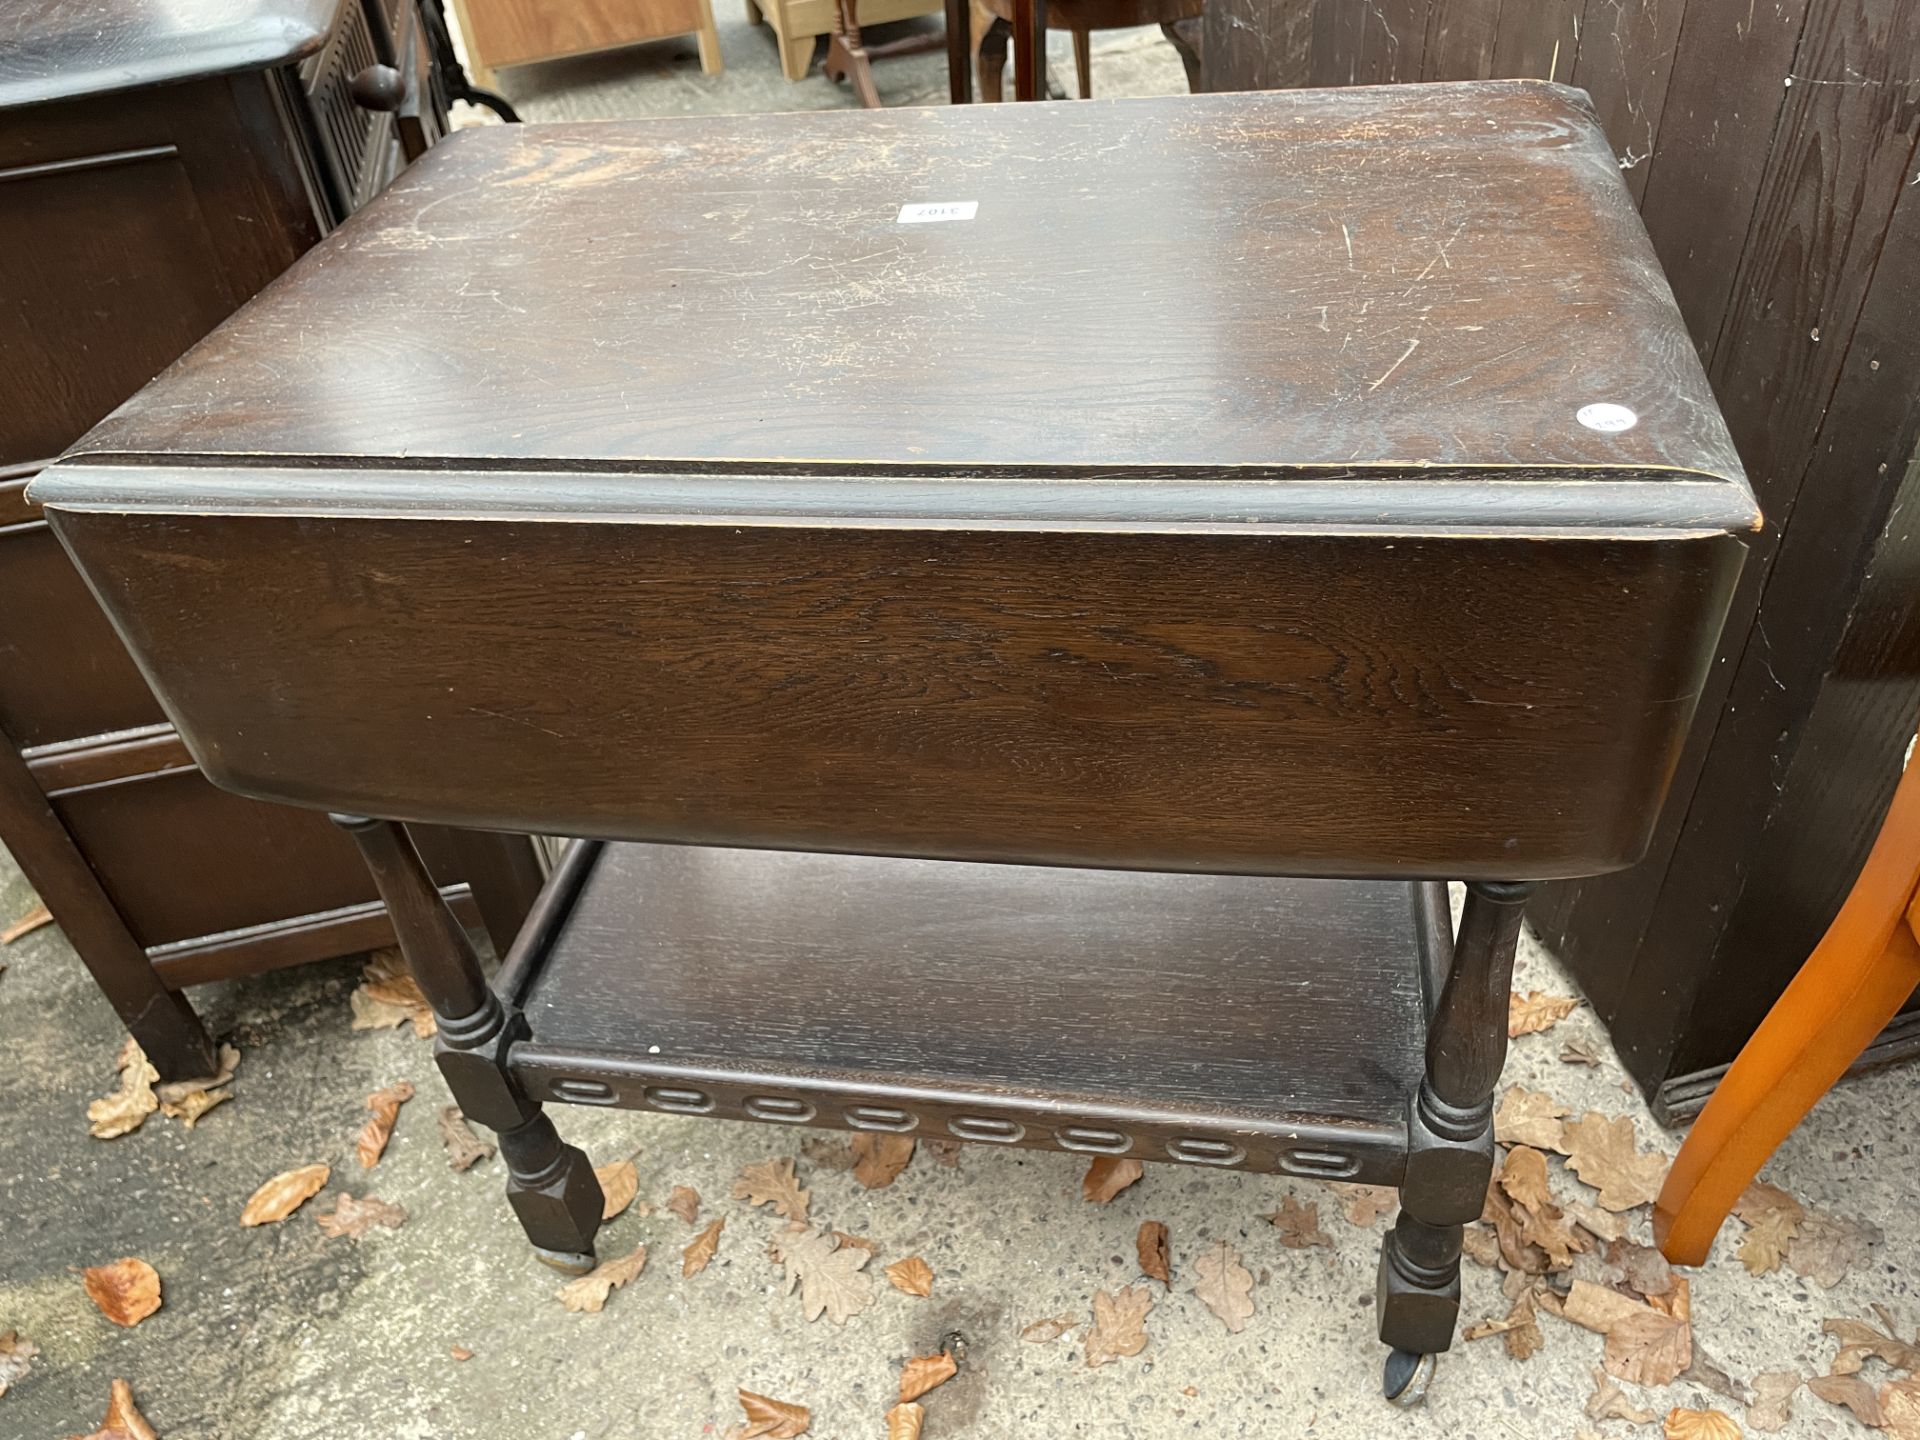 A MODERN DROP-LEAF TROLLEY WITH DRAWER - Image 2 of 2